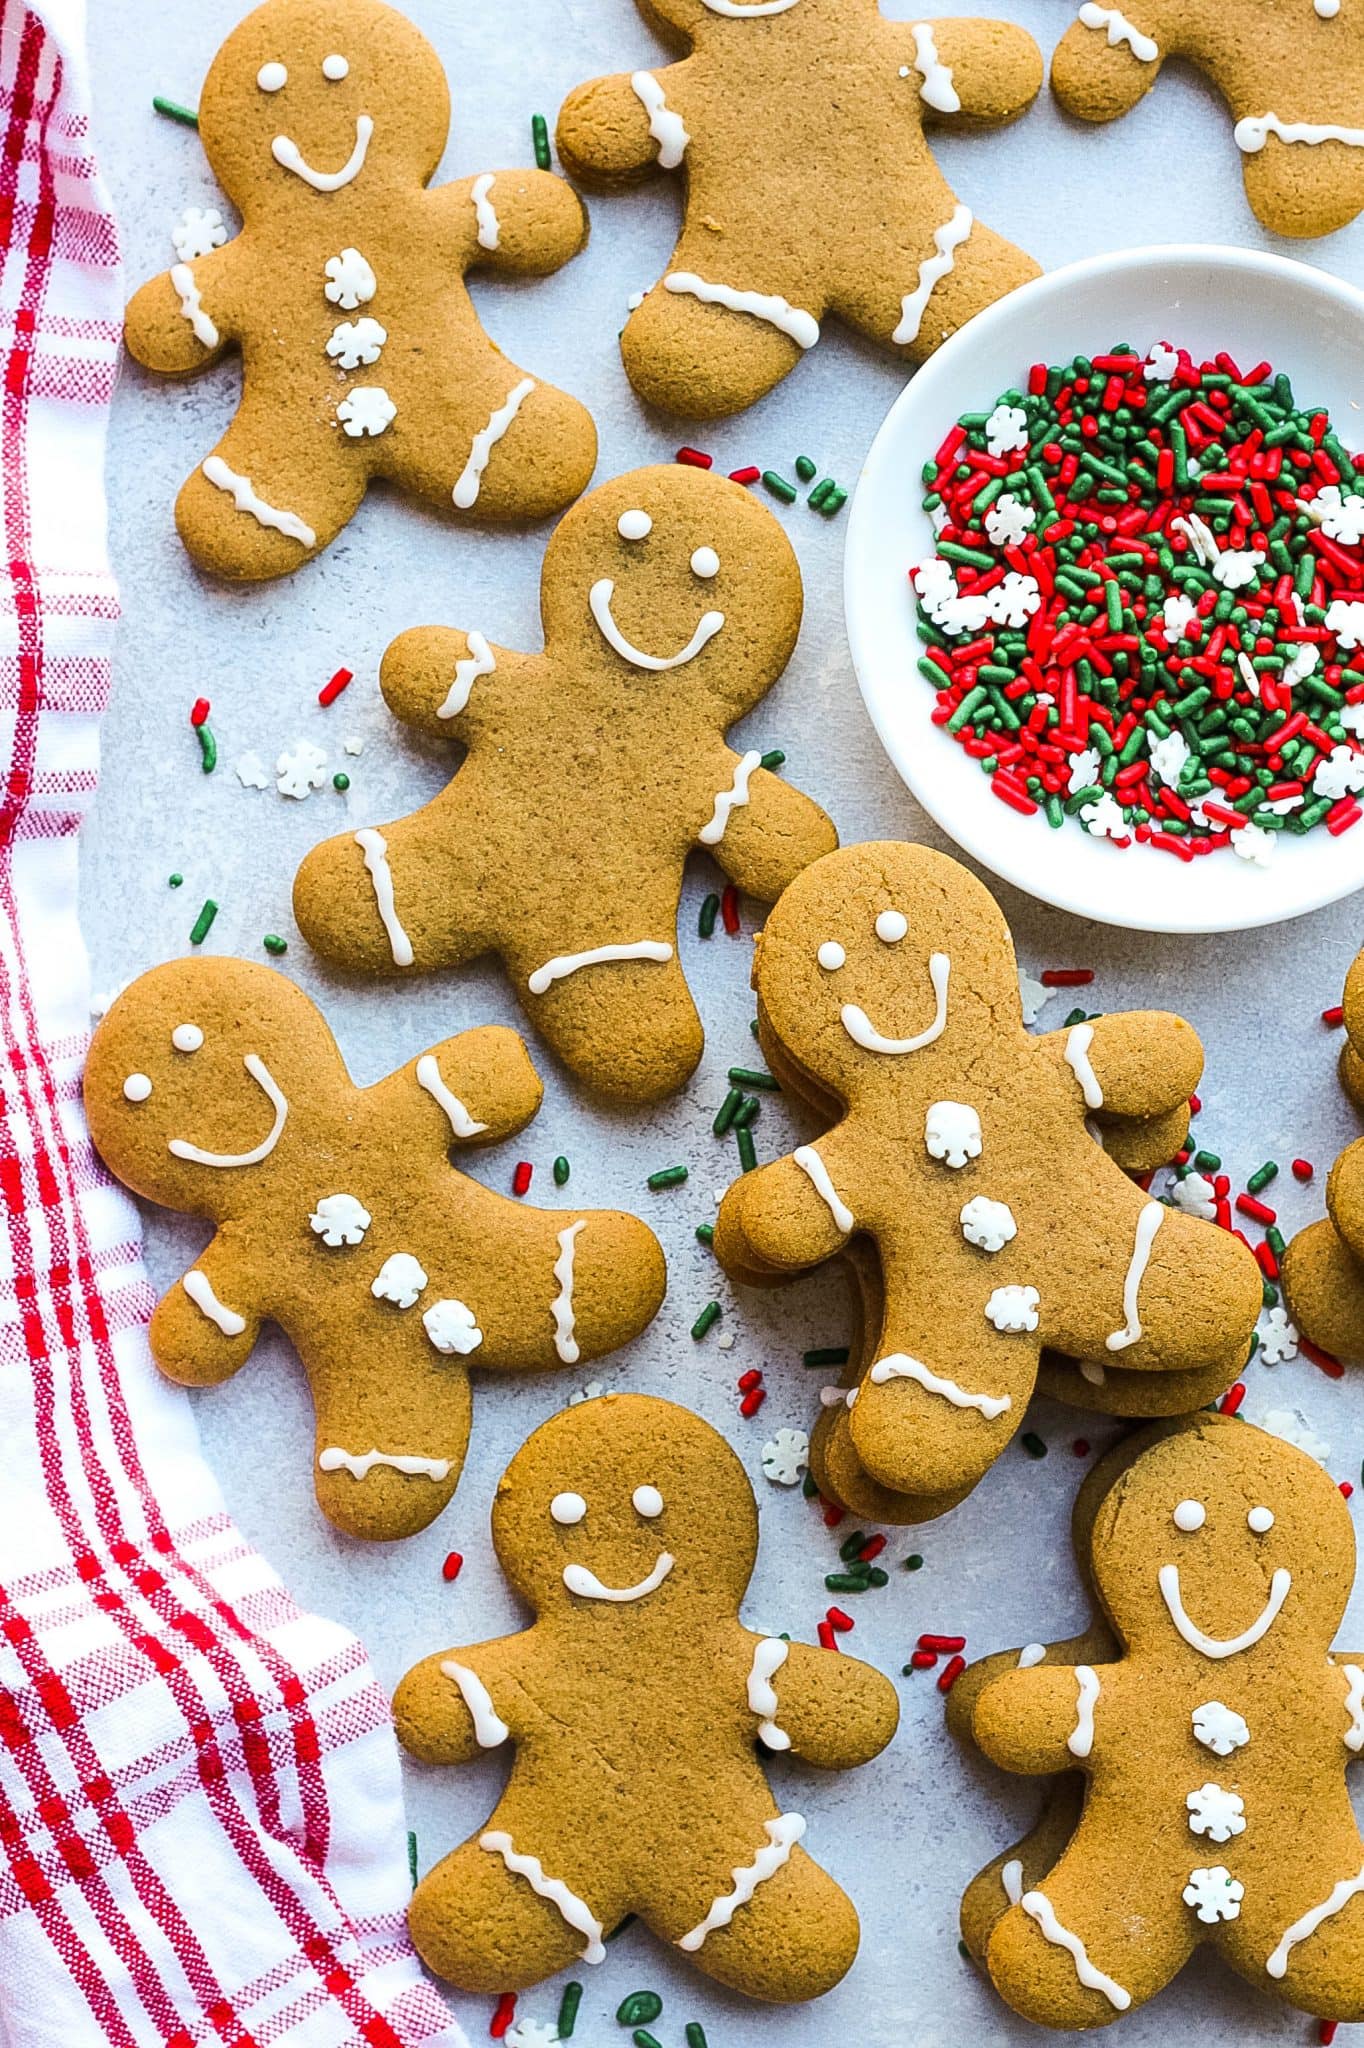 The Best Gingerbread Men Cookie Recipe (Soft & Chewy)